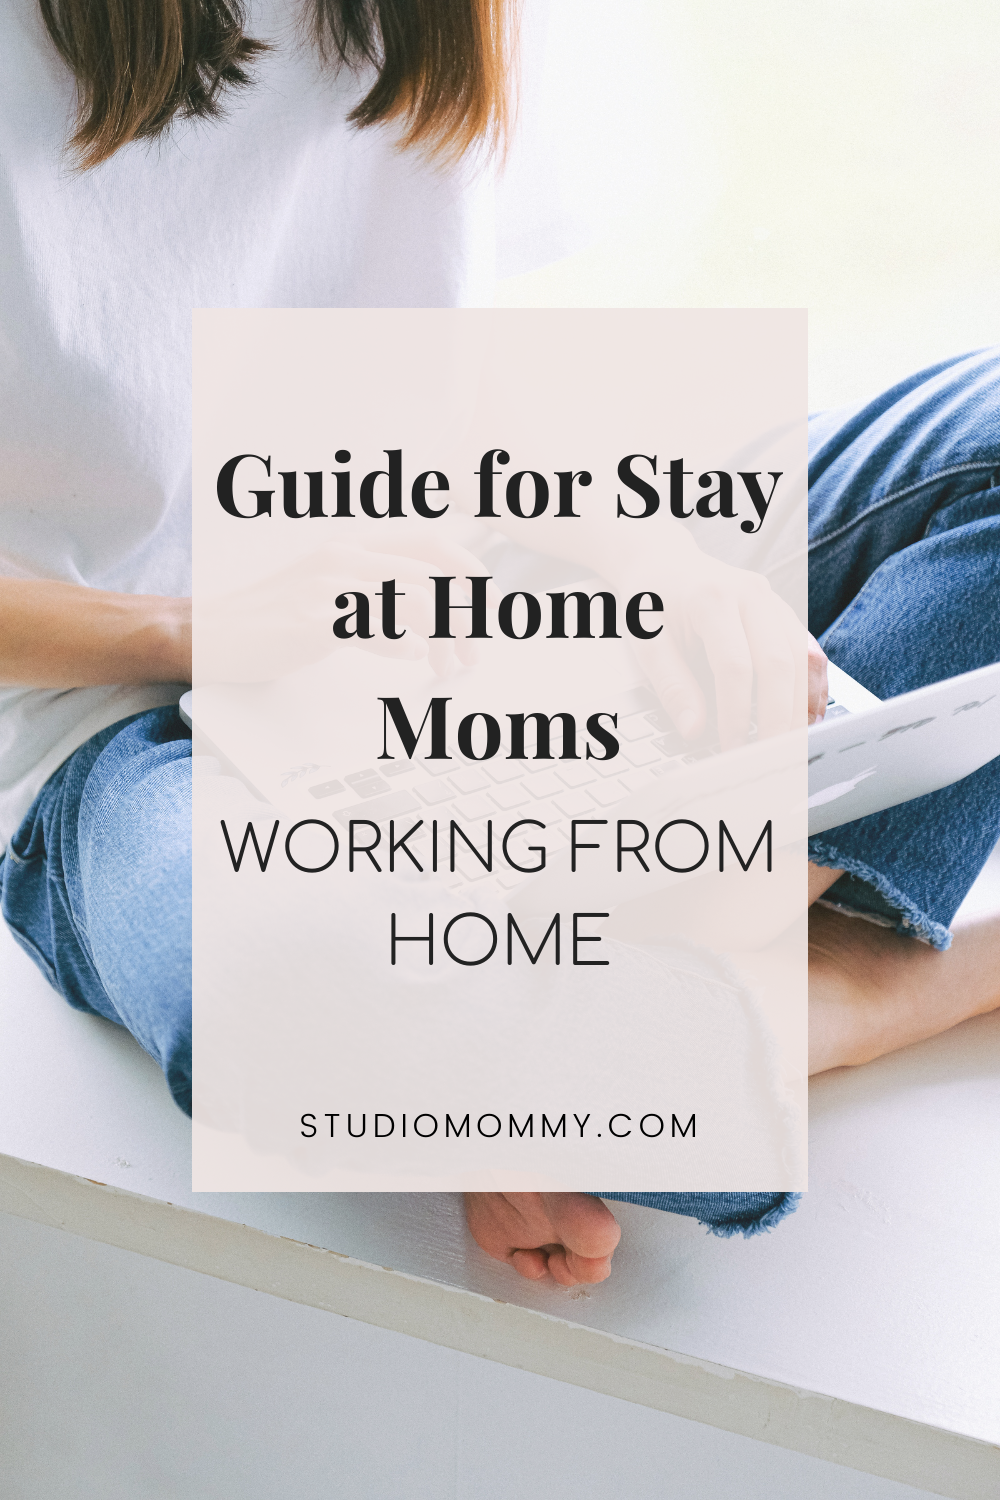 Working from home can be very rewarding, offering moms the opportunity to earn money from home while caring for their children. But how can you successfully schedule your day when you have small children at home? Here are some tips for SAHMs who are working from home with small children: